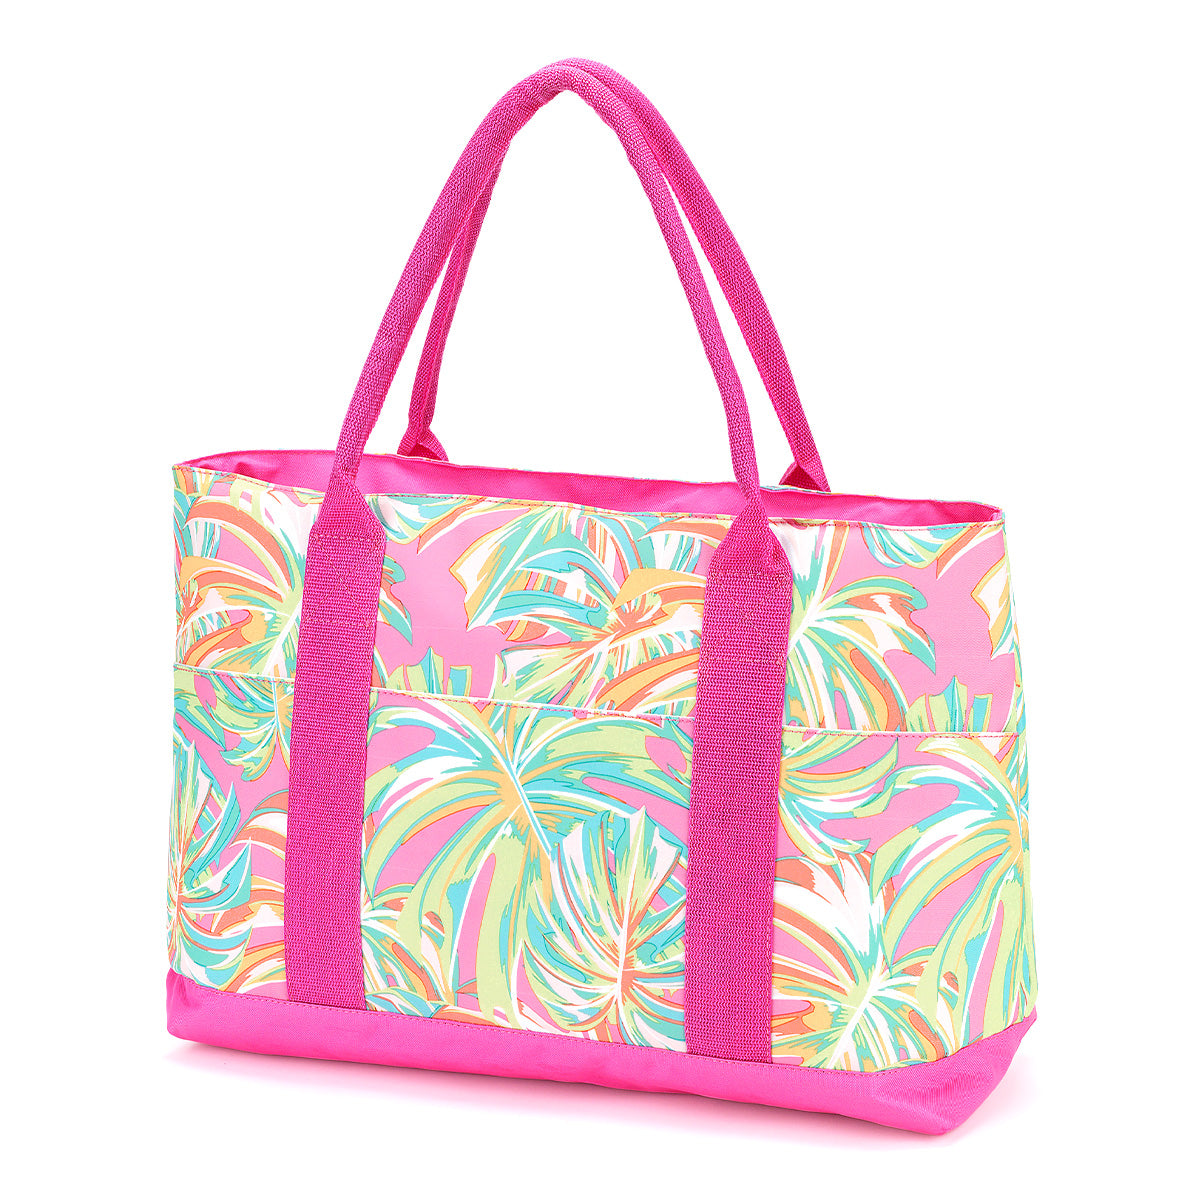 Let's Get Tropical Cooler Tote